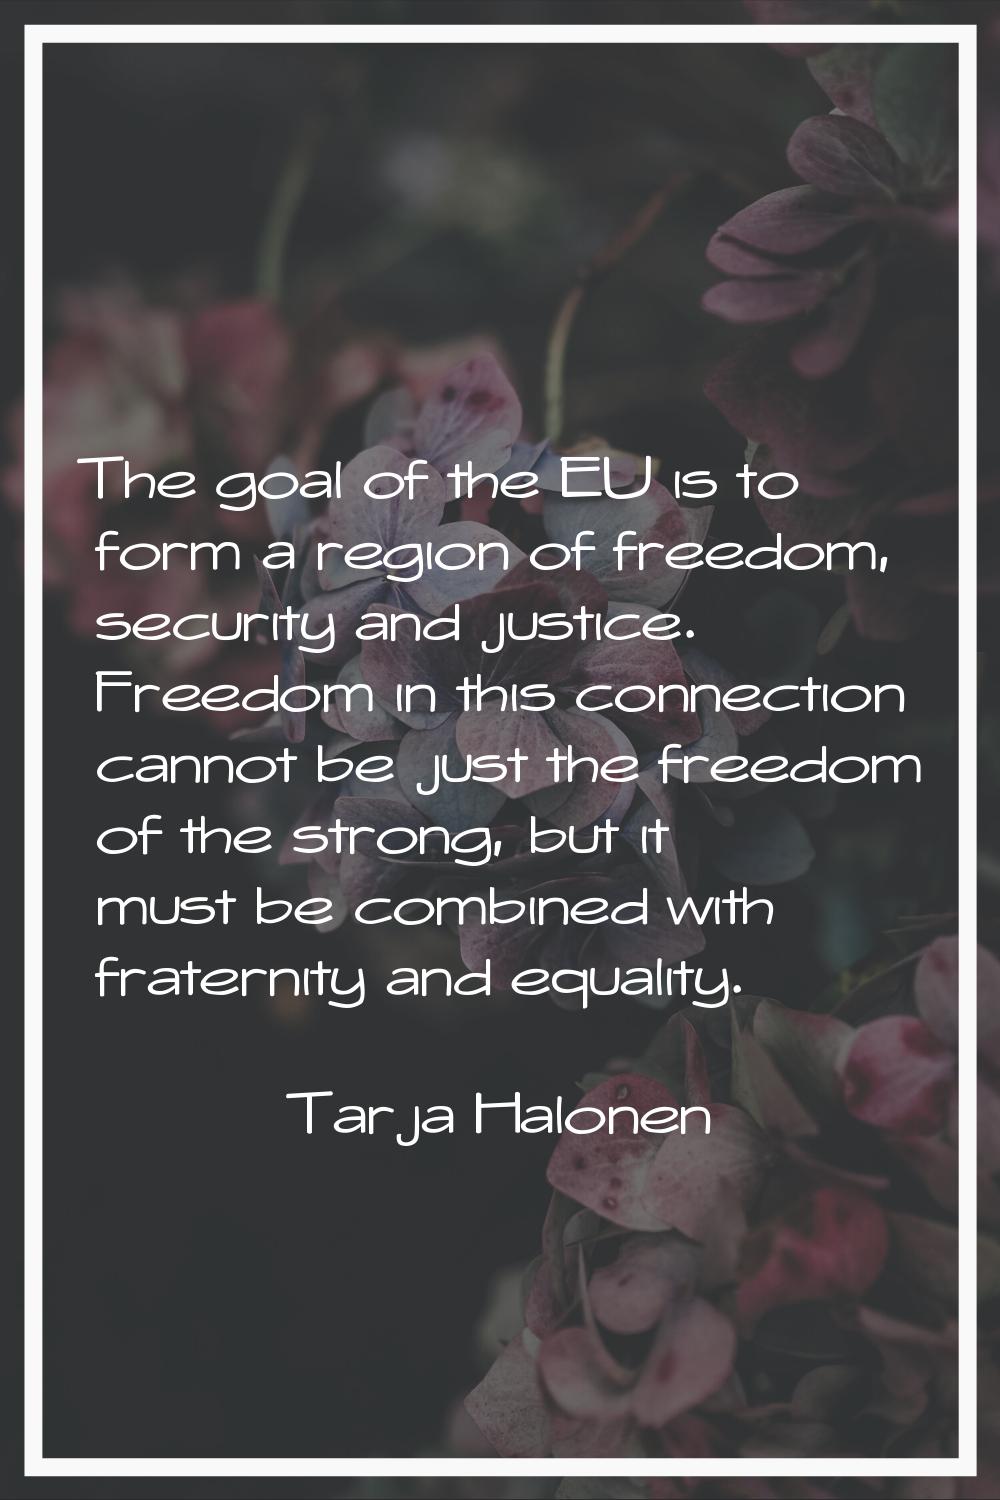 The goal of the EU is to form a region of freedom, security and justice. Freedom in this connection